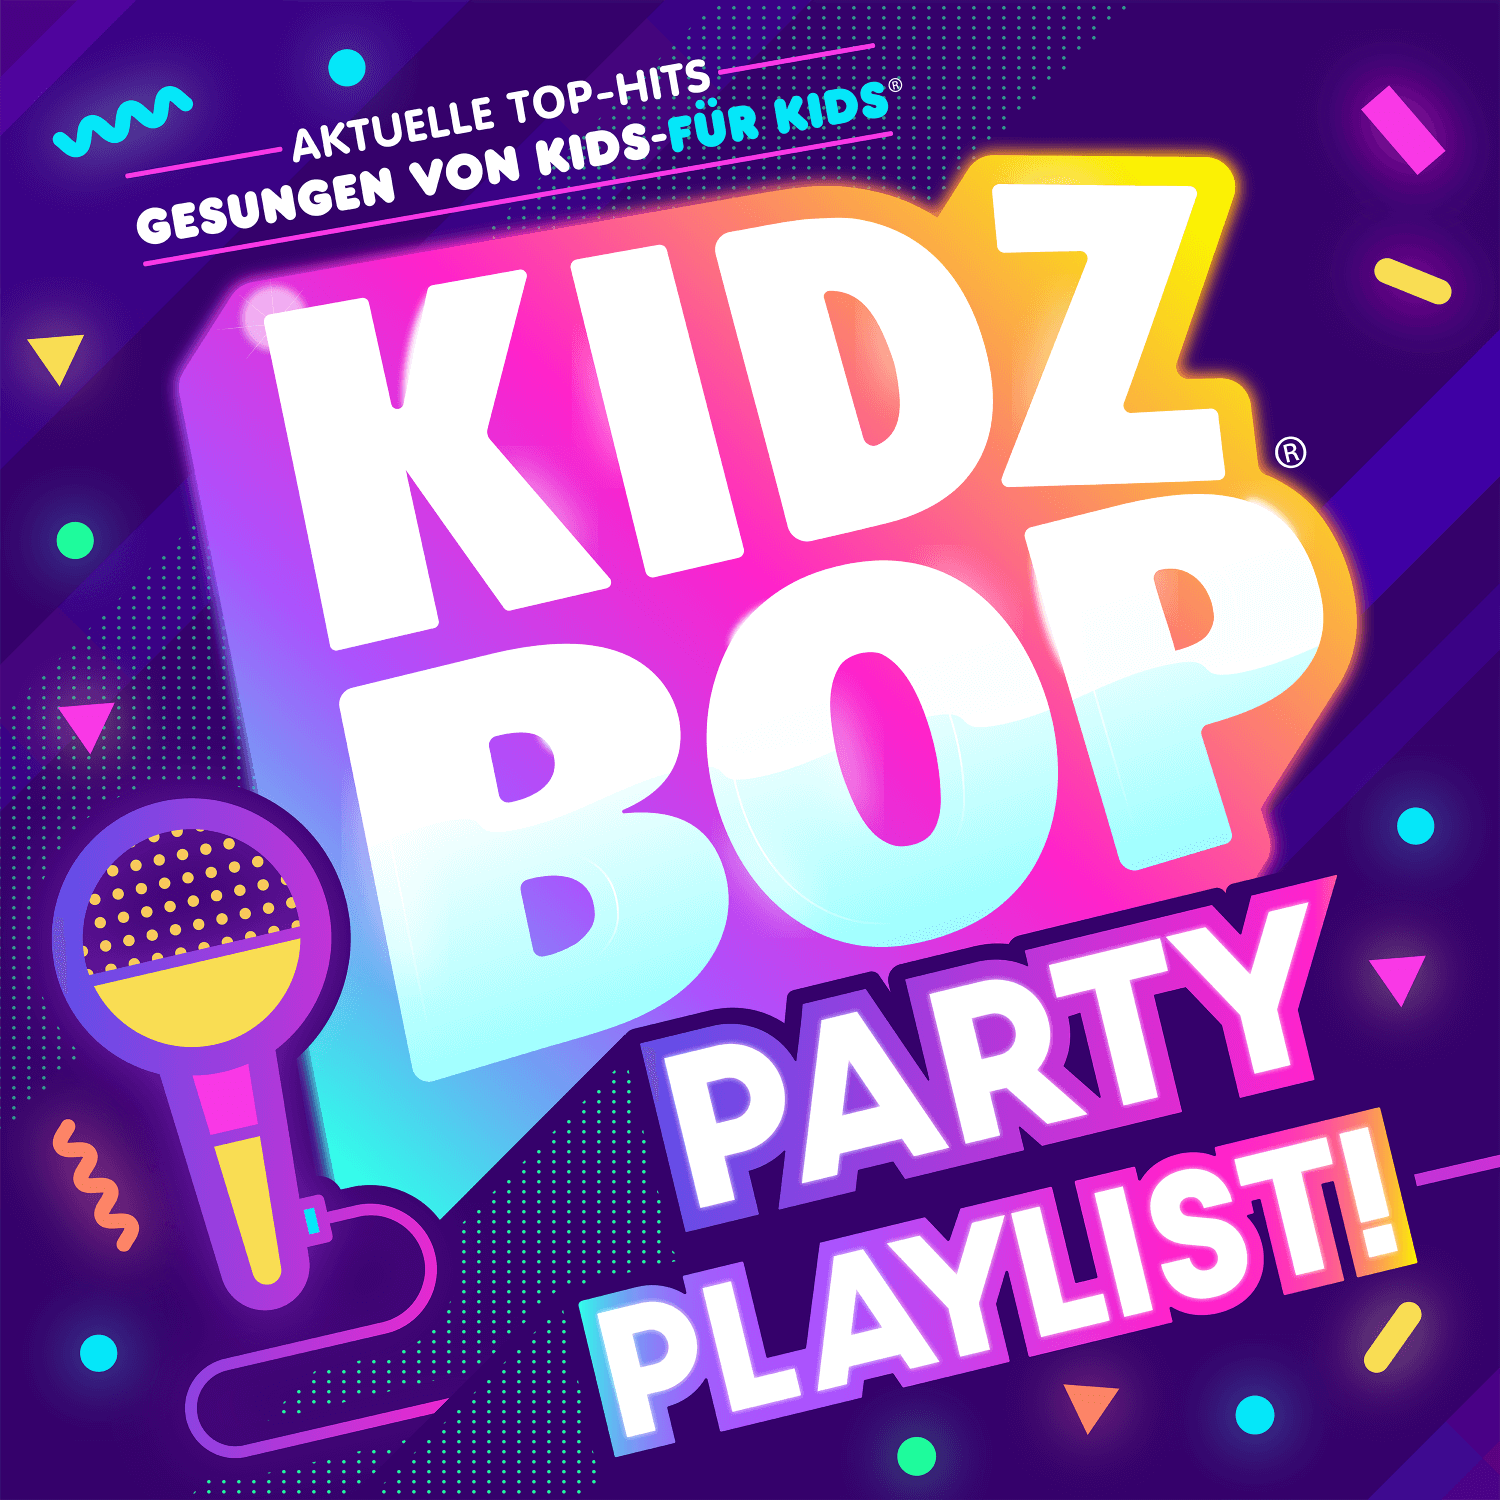 Featured image for “KIDZ BOP Party Playlist!”